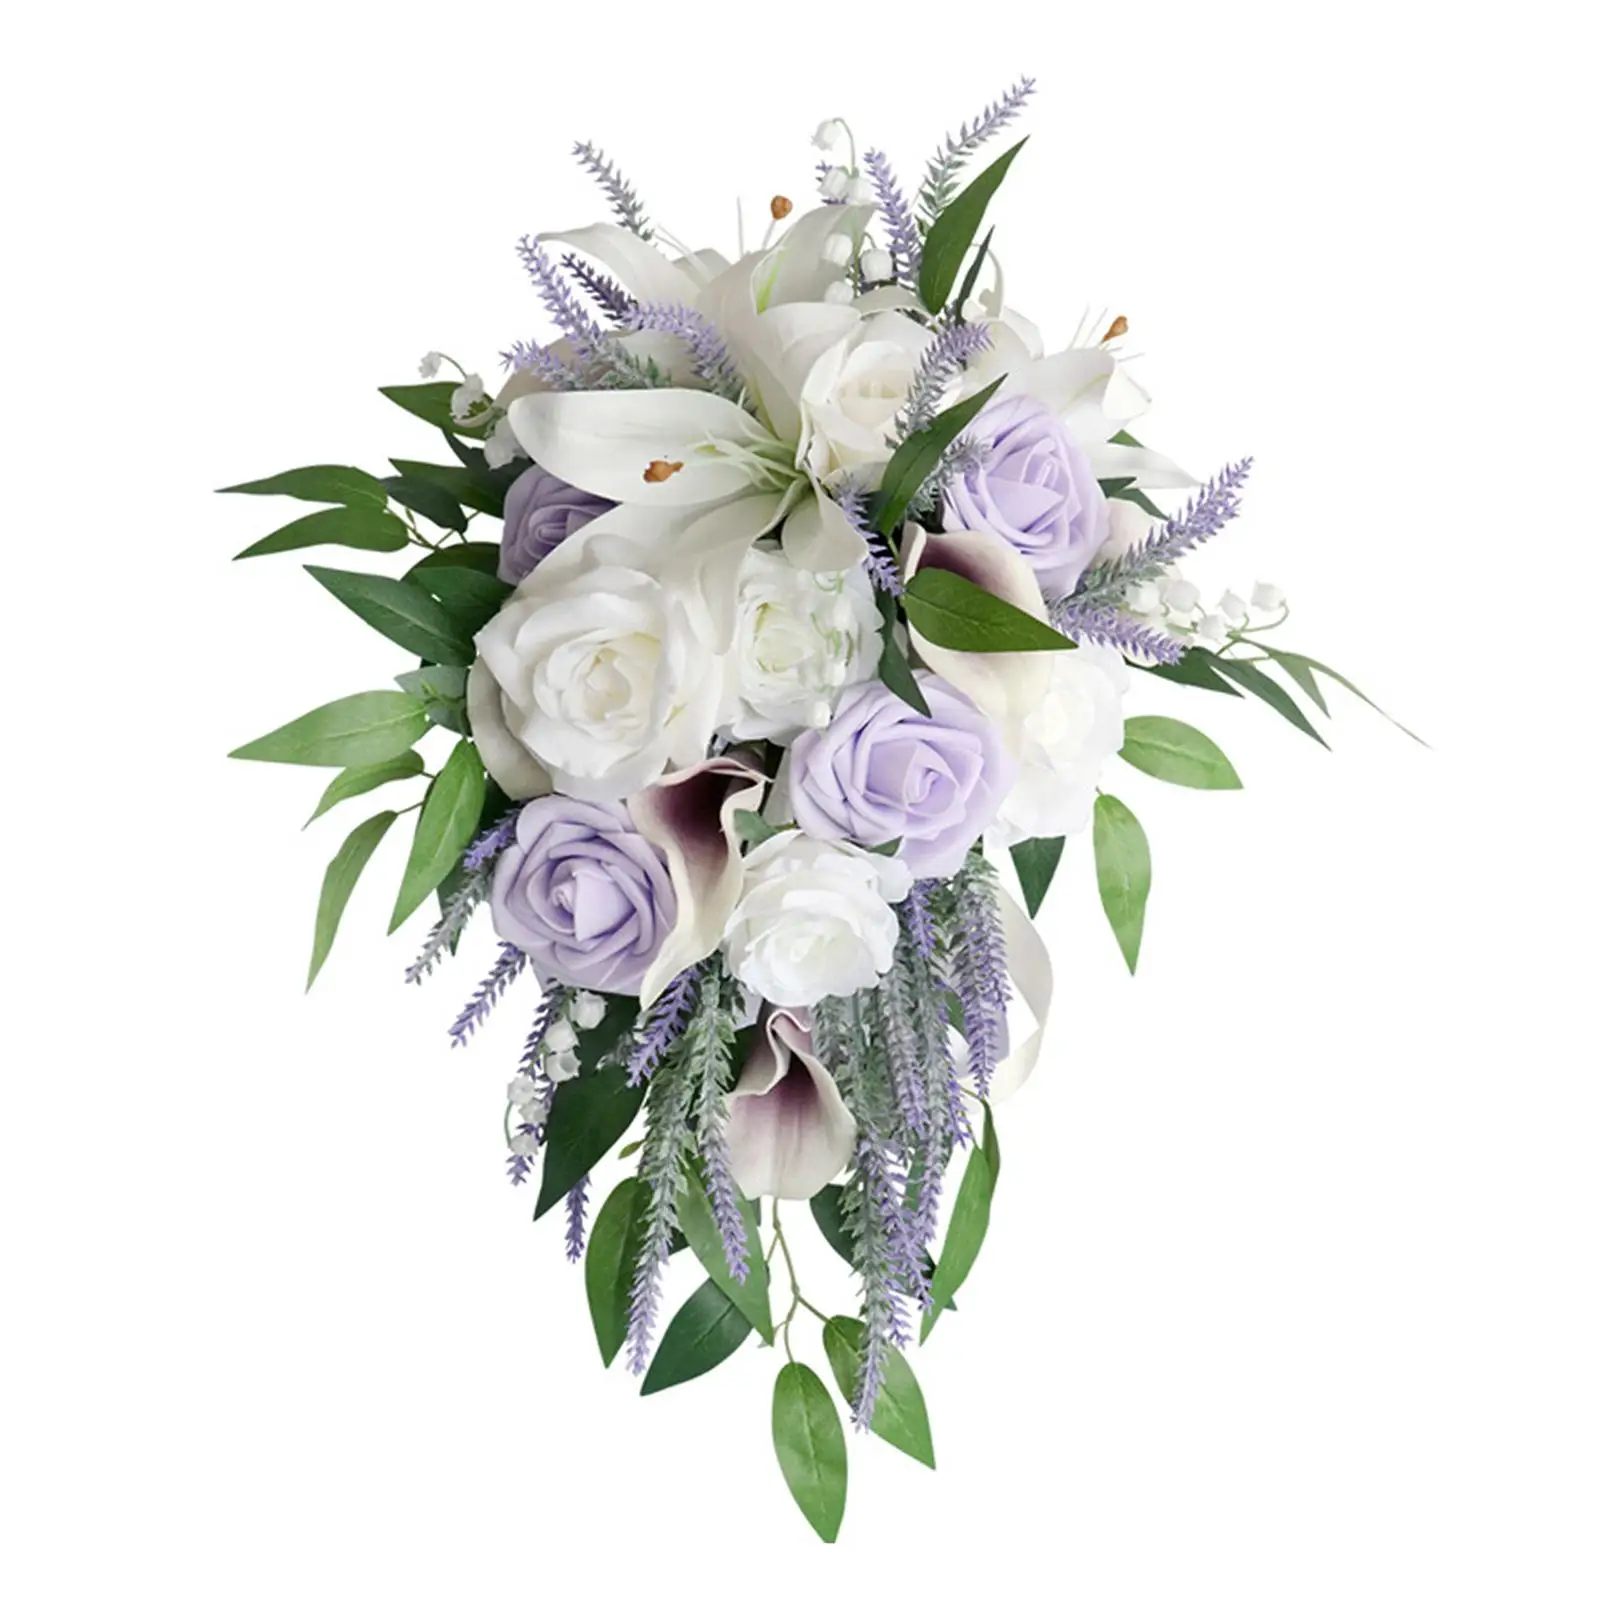 Handmade Wedding Bouquet Water Drop Style Decoration 26x45cm Artificial Flowers for Wedding Ceremony Festival Proposal Church